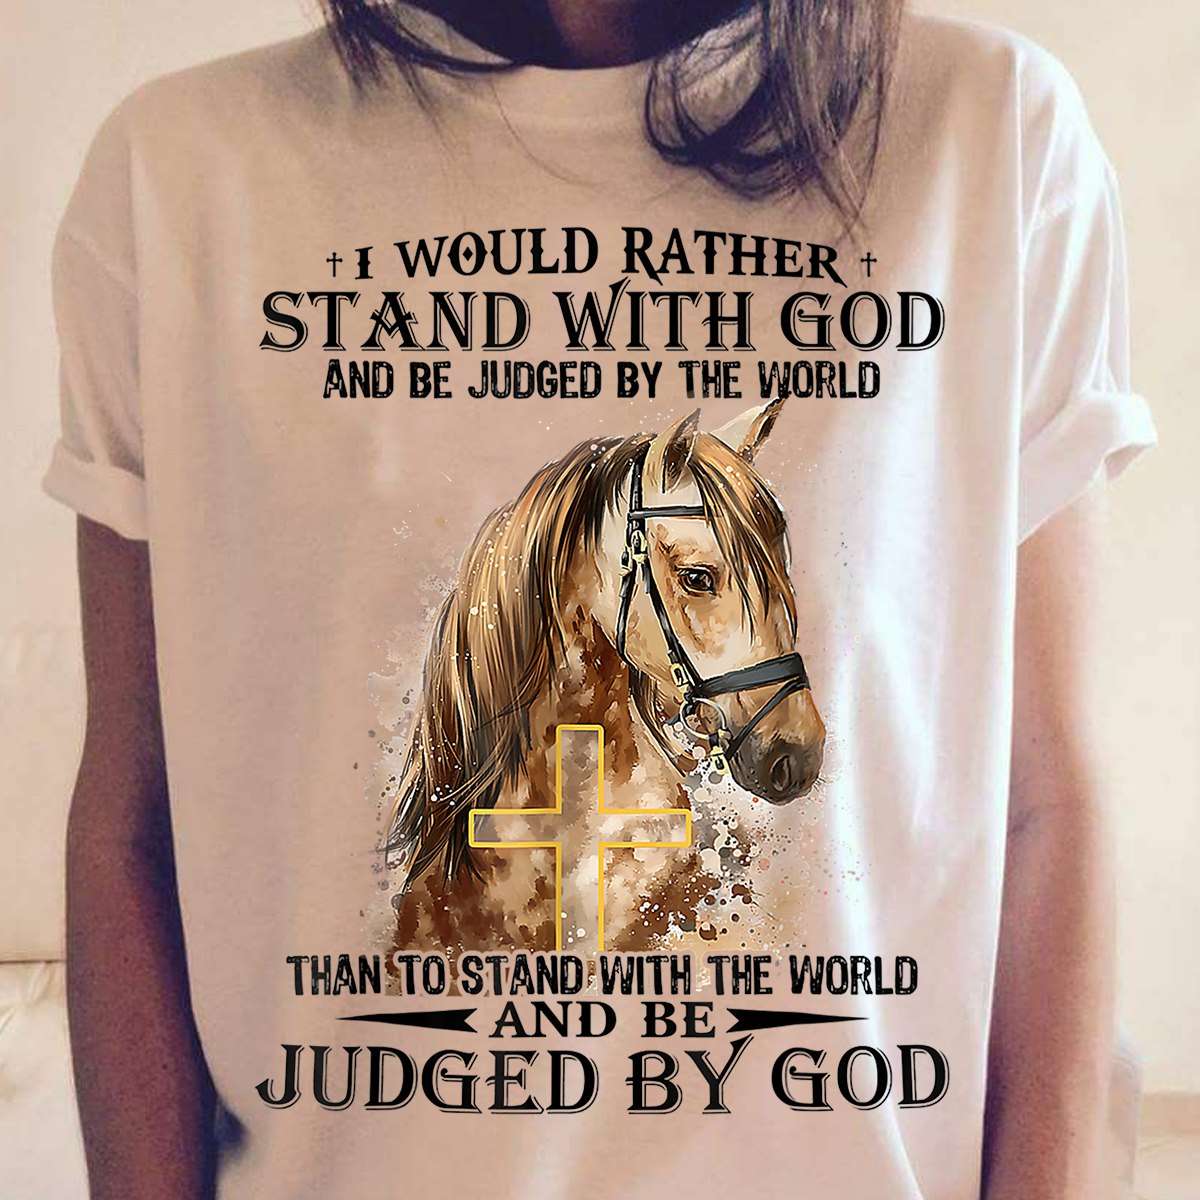 I would rather stand with god and be judged by the world - Horses and Jesus, Jesus the god